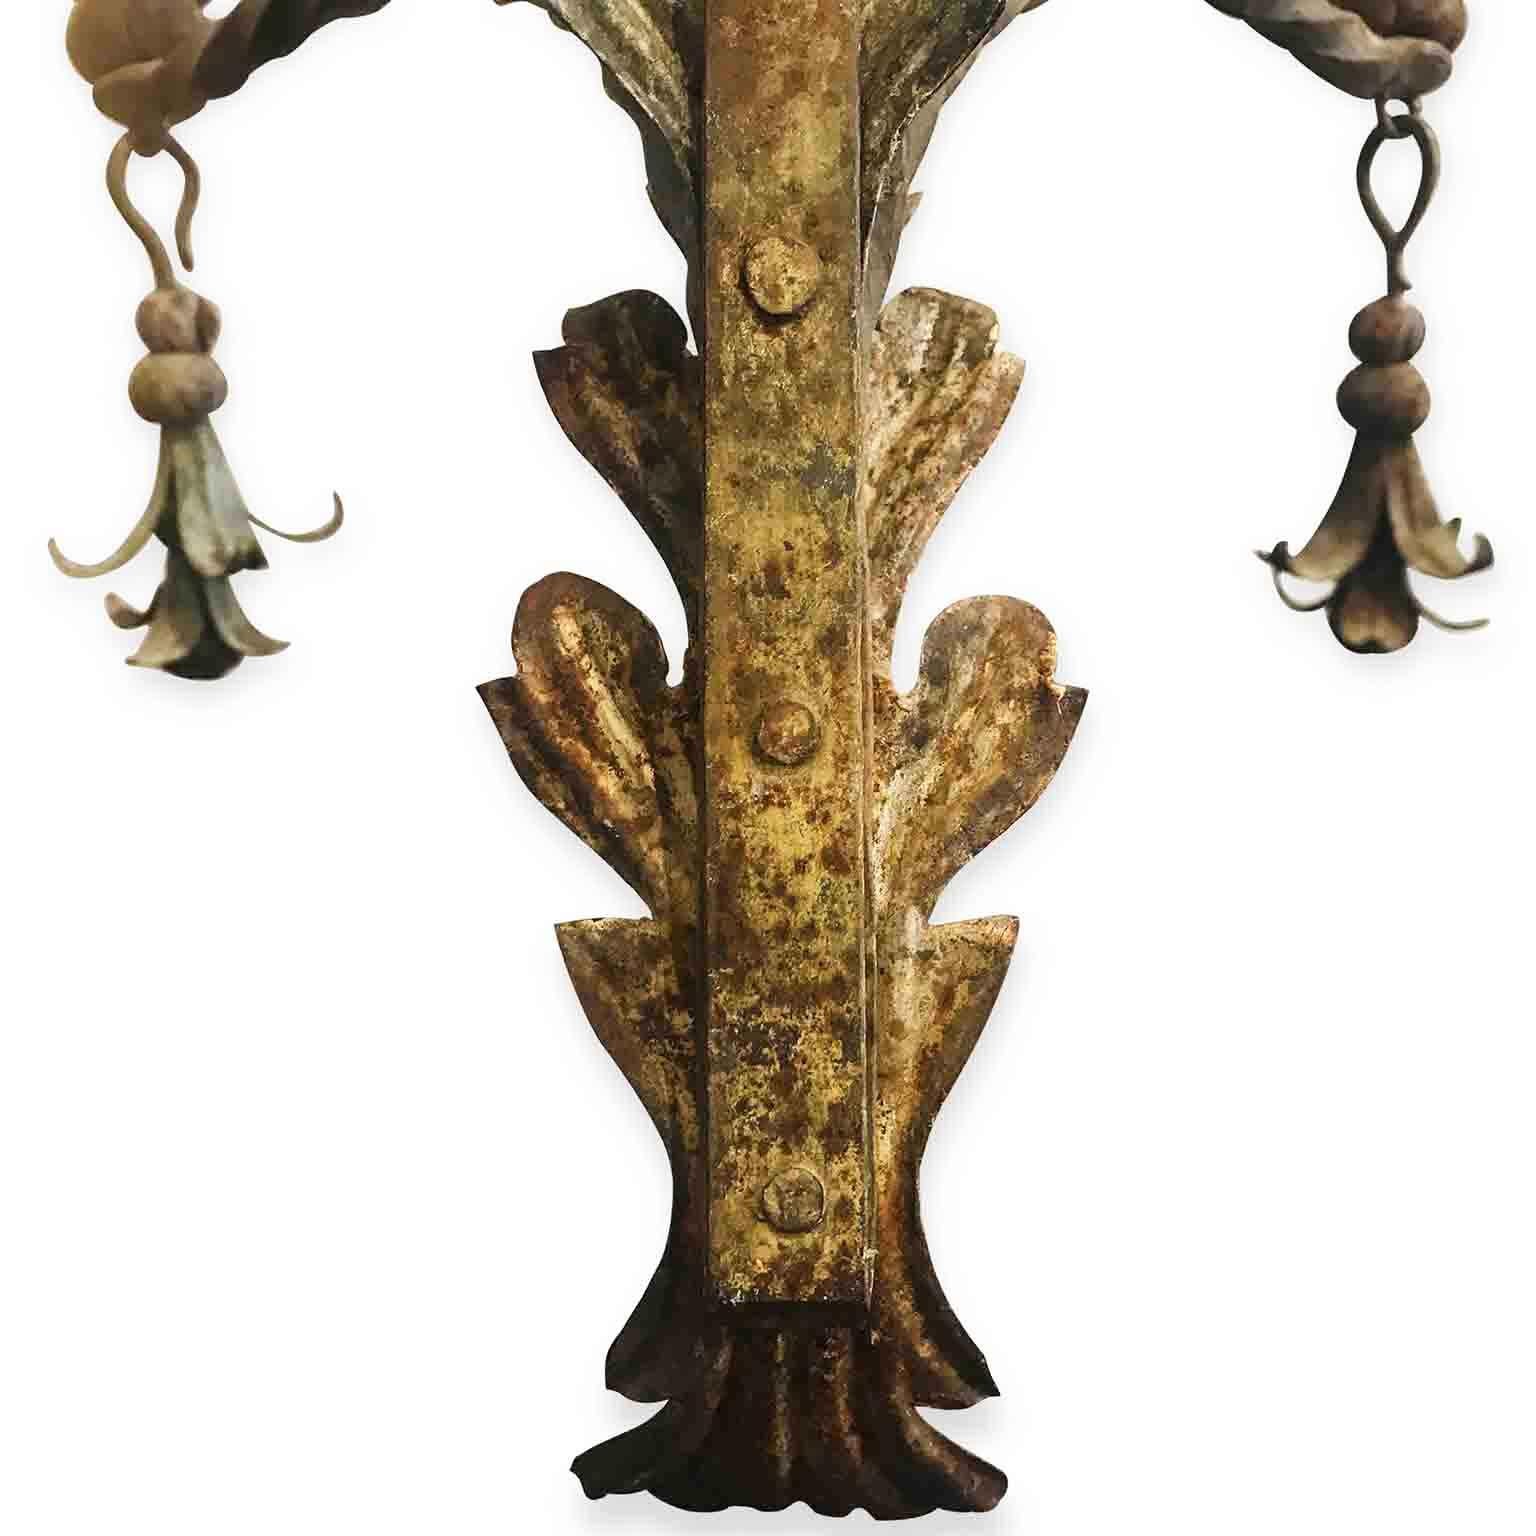 19th Century Pair of 19th-Century Italian Floral Sconces Hand-Forged Wrought Iron Wall Lights